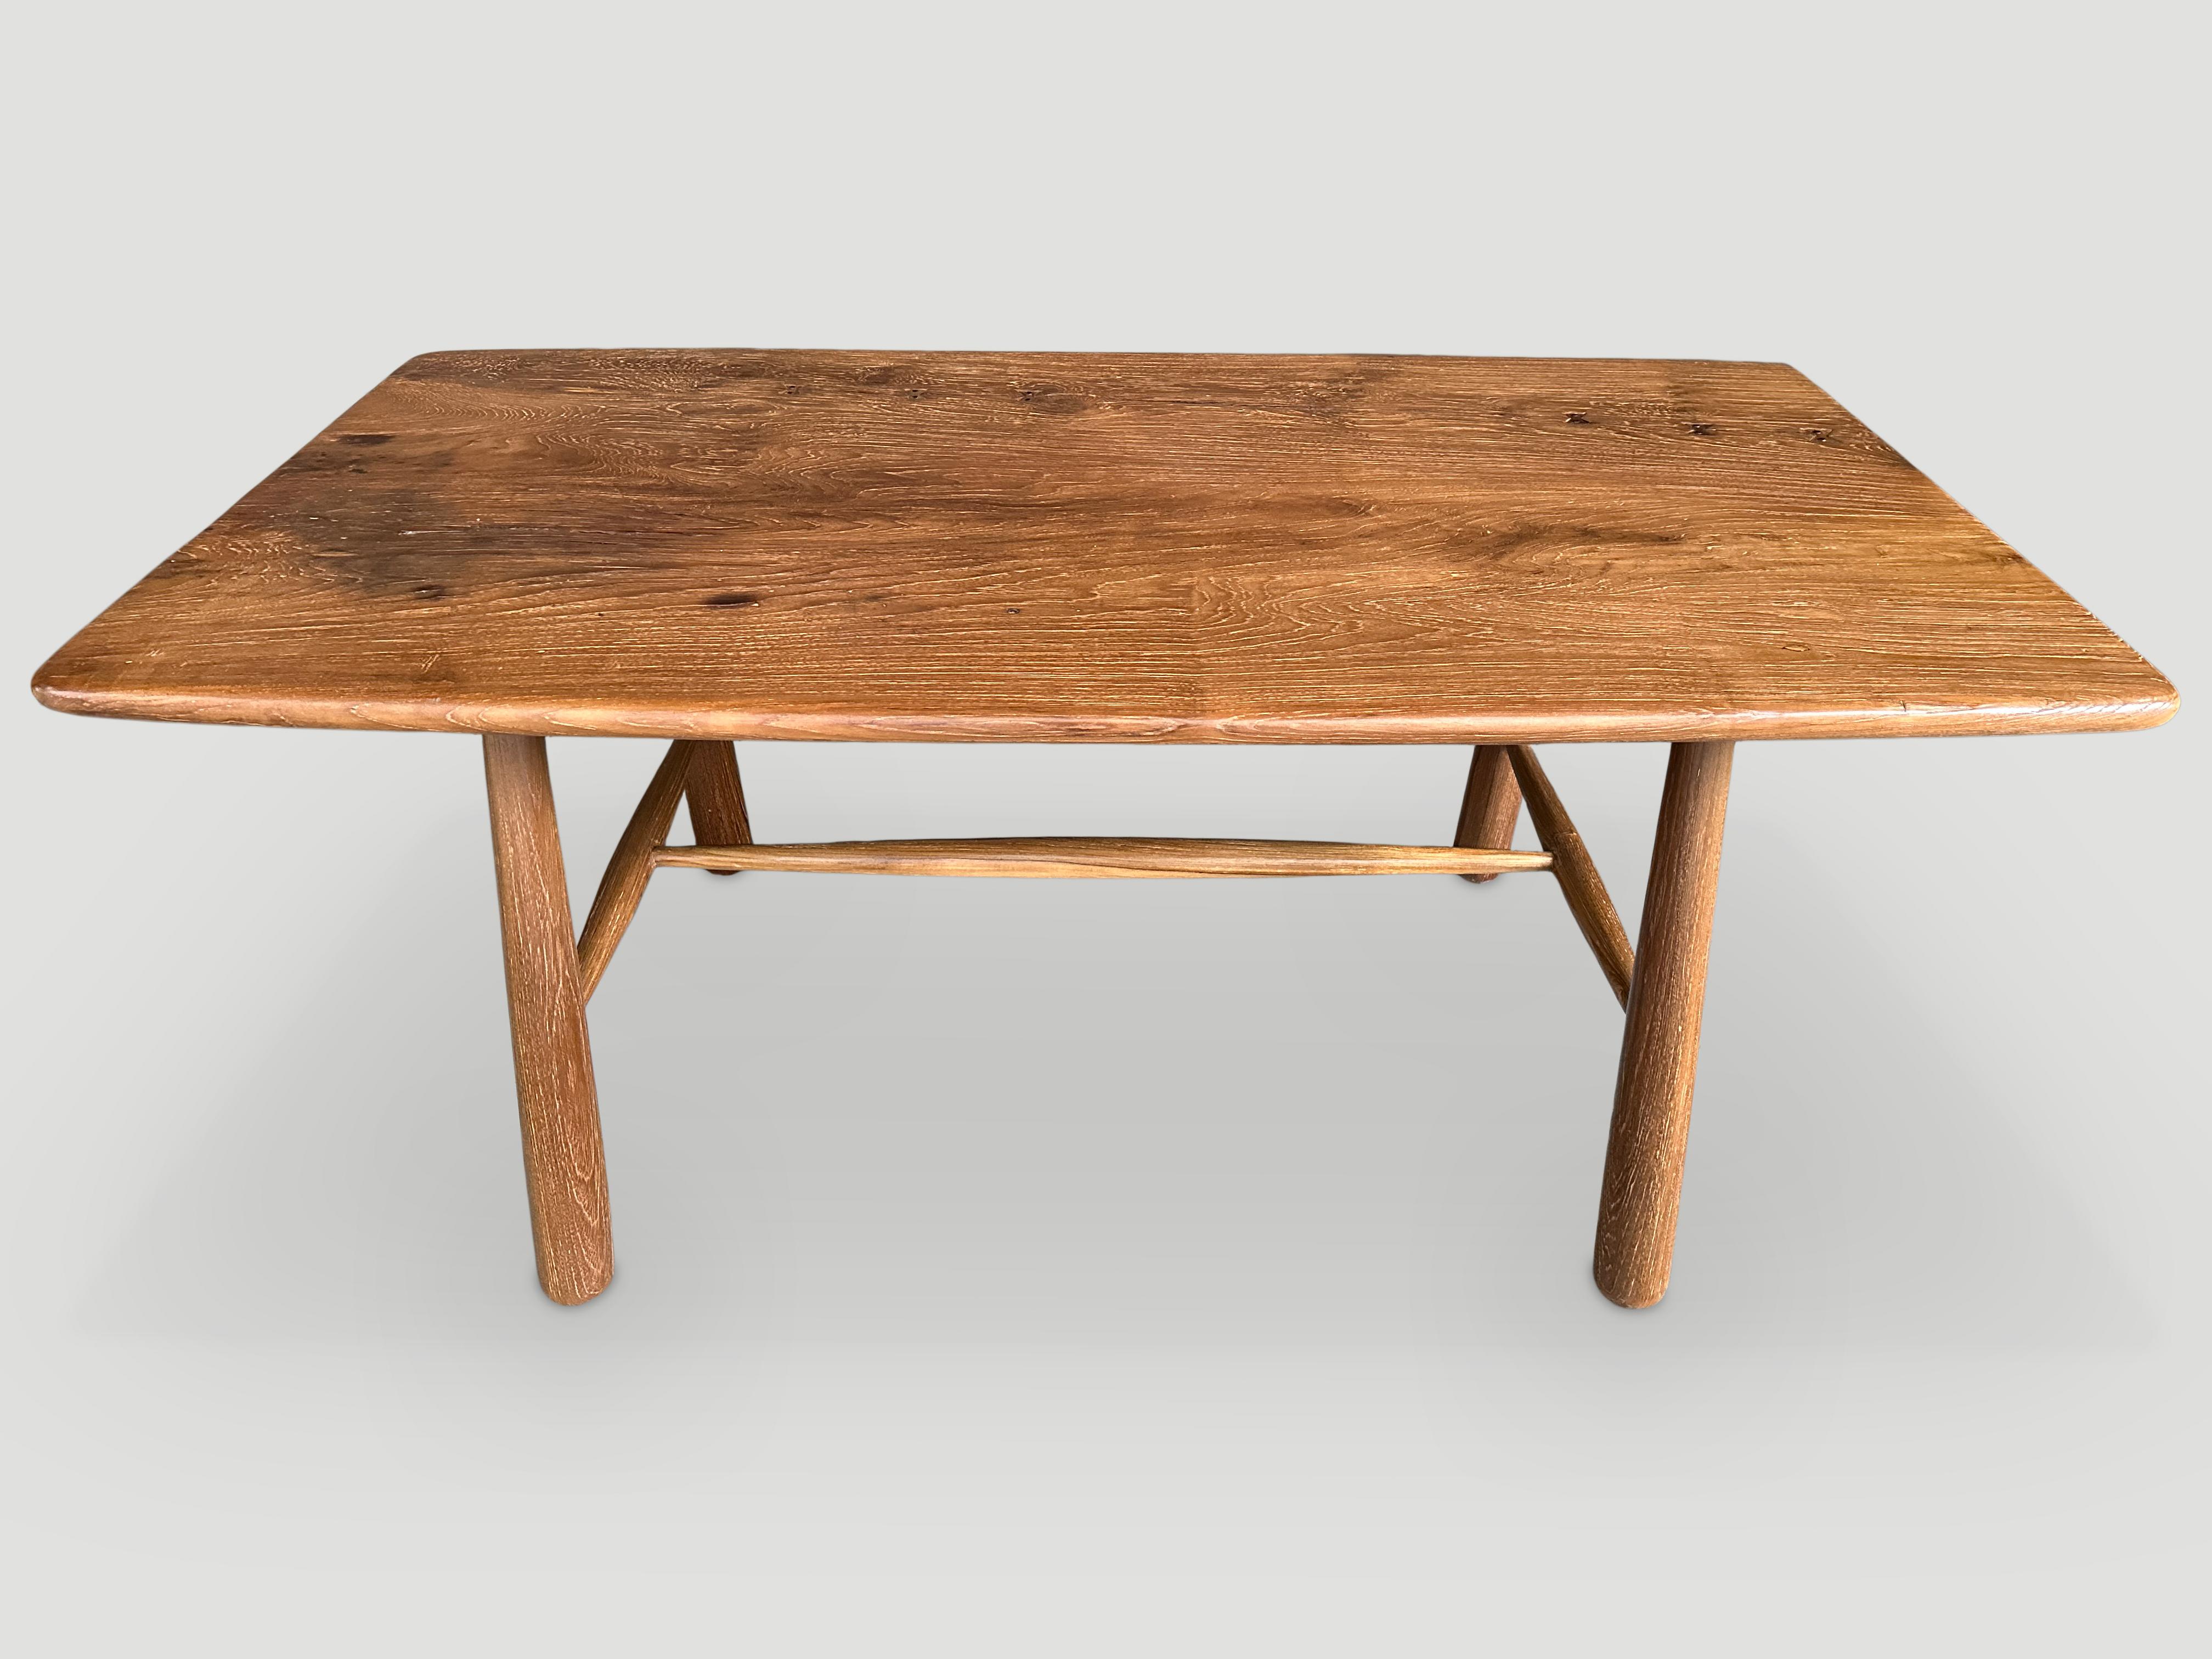 Midcentury Couture Teak Wood Dining Table or Desk In Excellent Condition For Sale In New York, NY